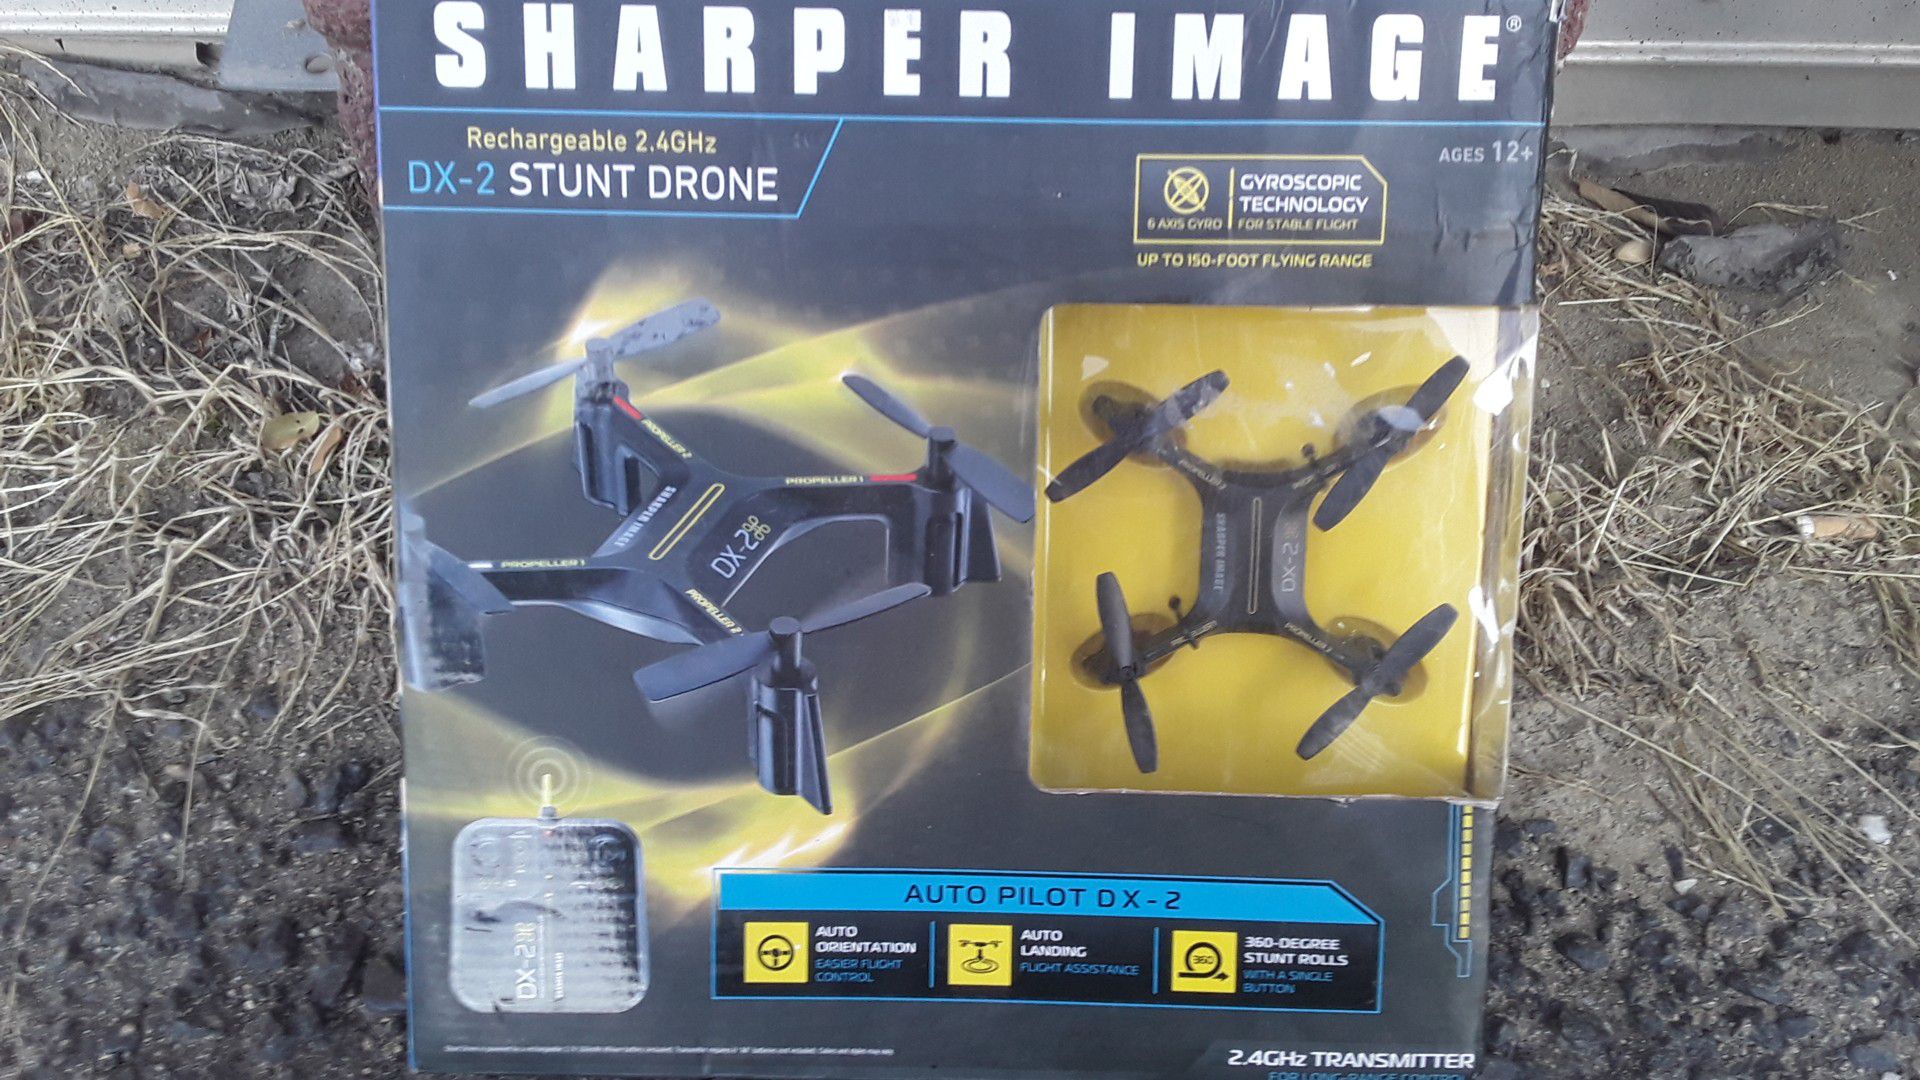 DX-2 Stunt Drone, rechargeable